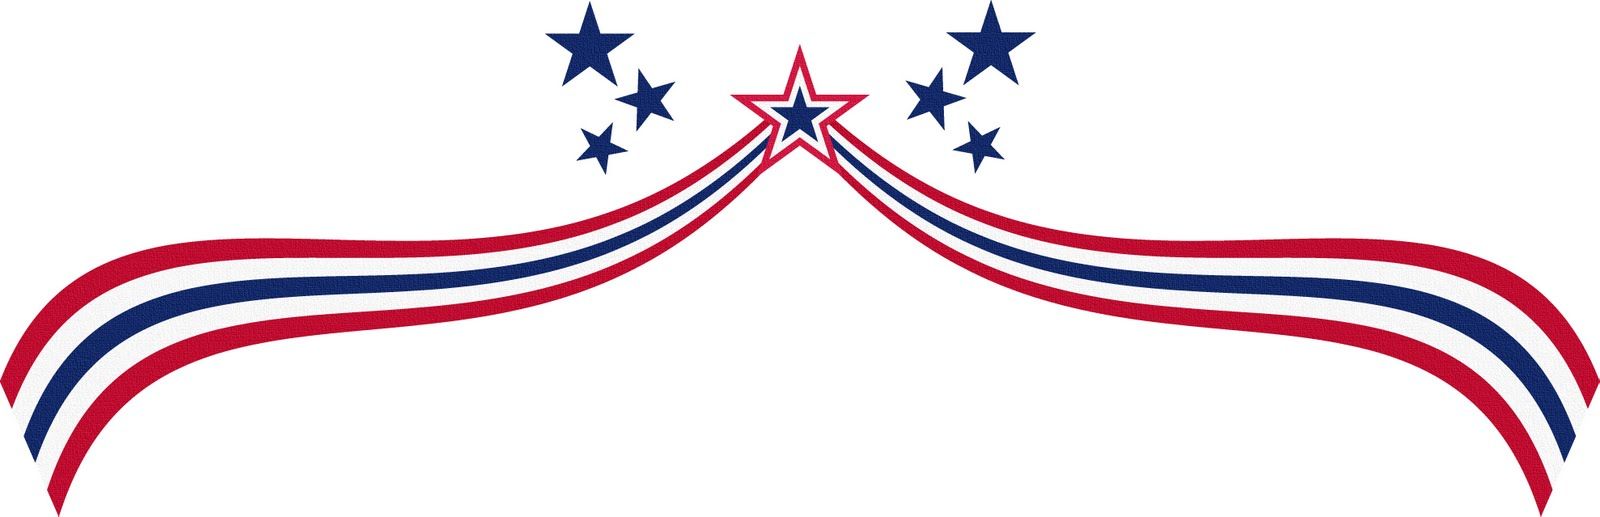 patriotic clipart side view